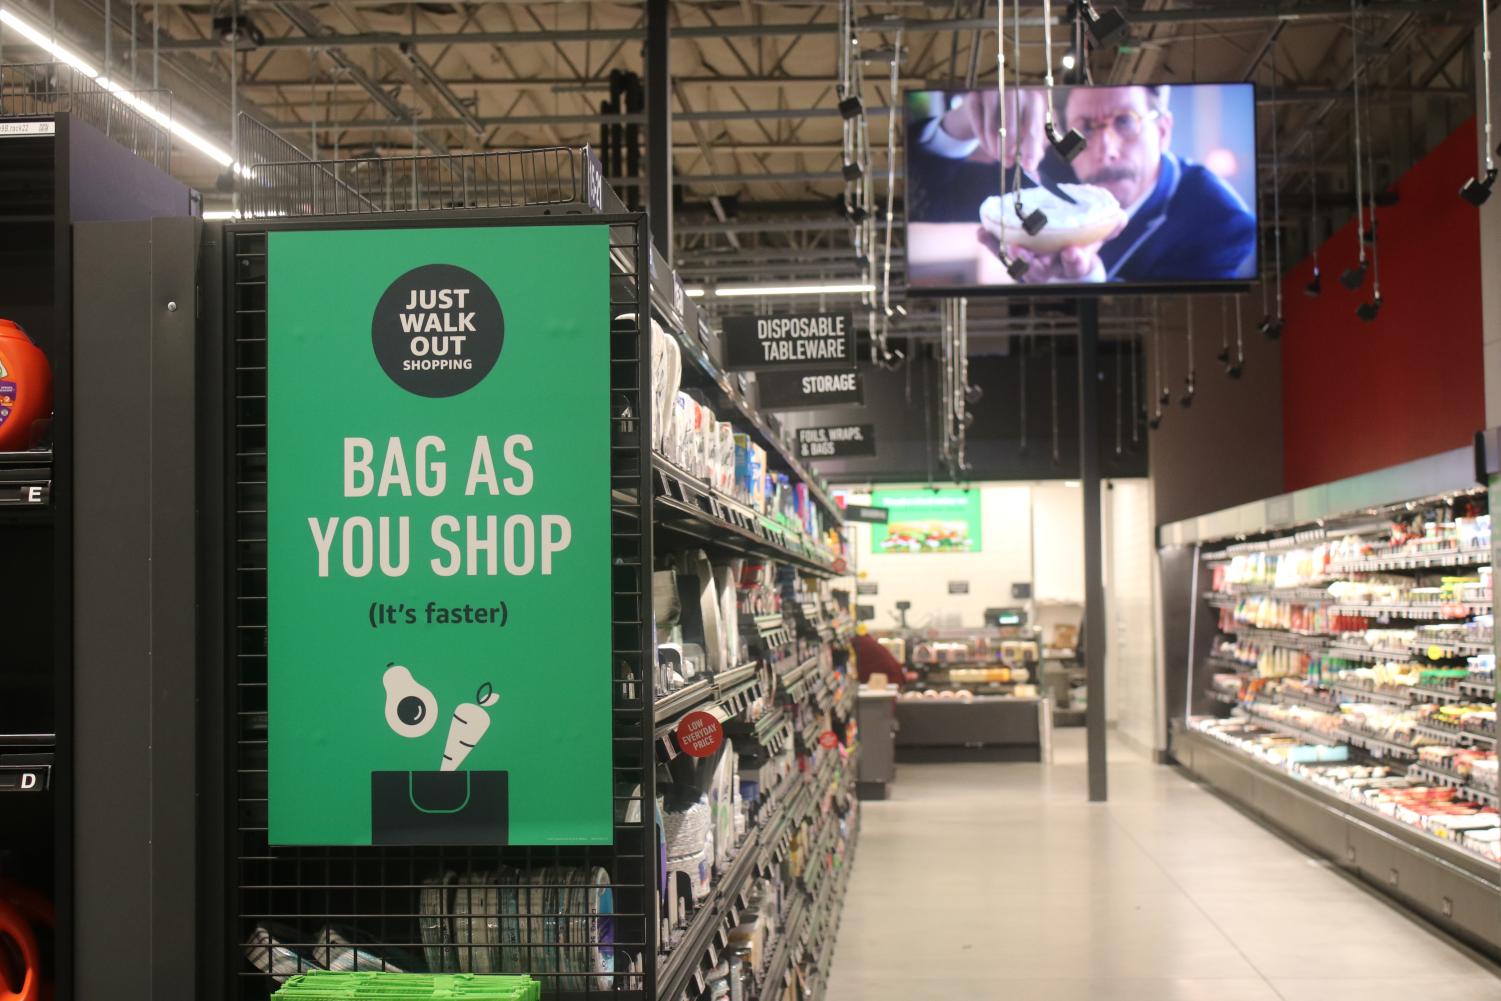 A sign inside the Amazon Fresh grocery store in Moorpark advertising their "Just Walk Out" technology. Photo Credit: Claire Boeck